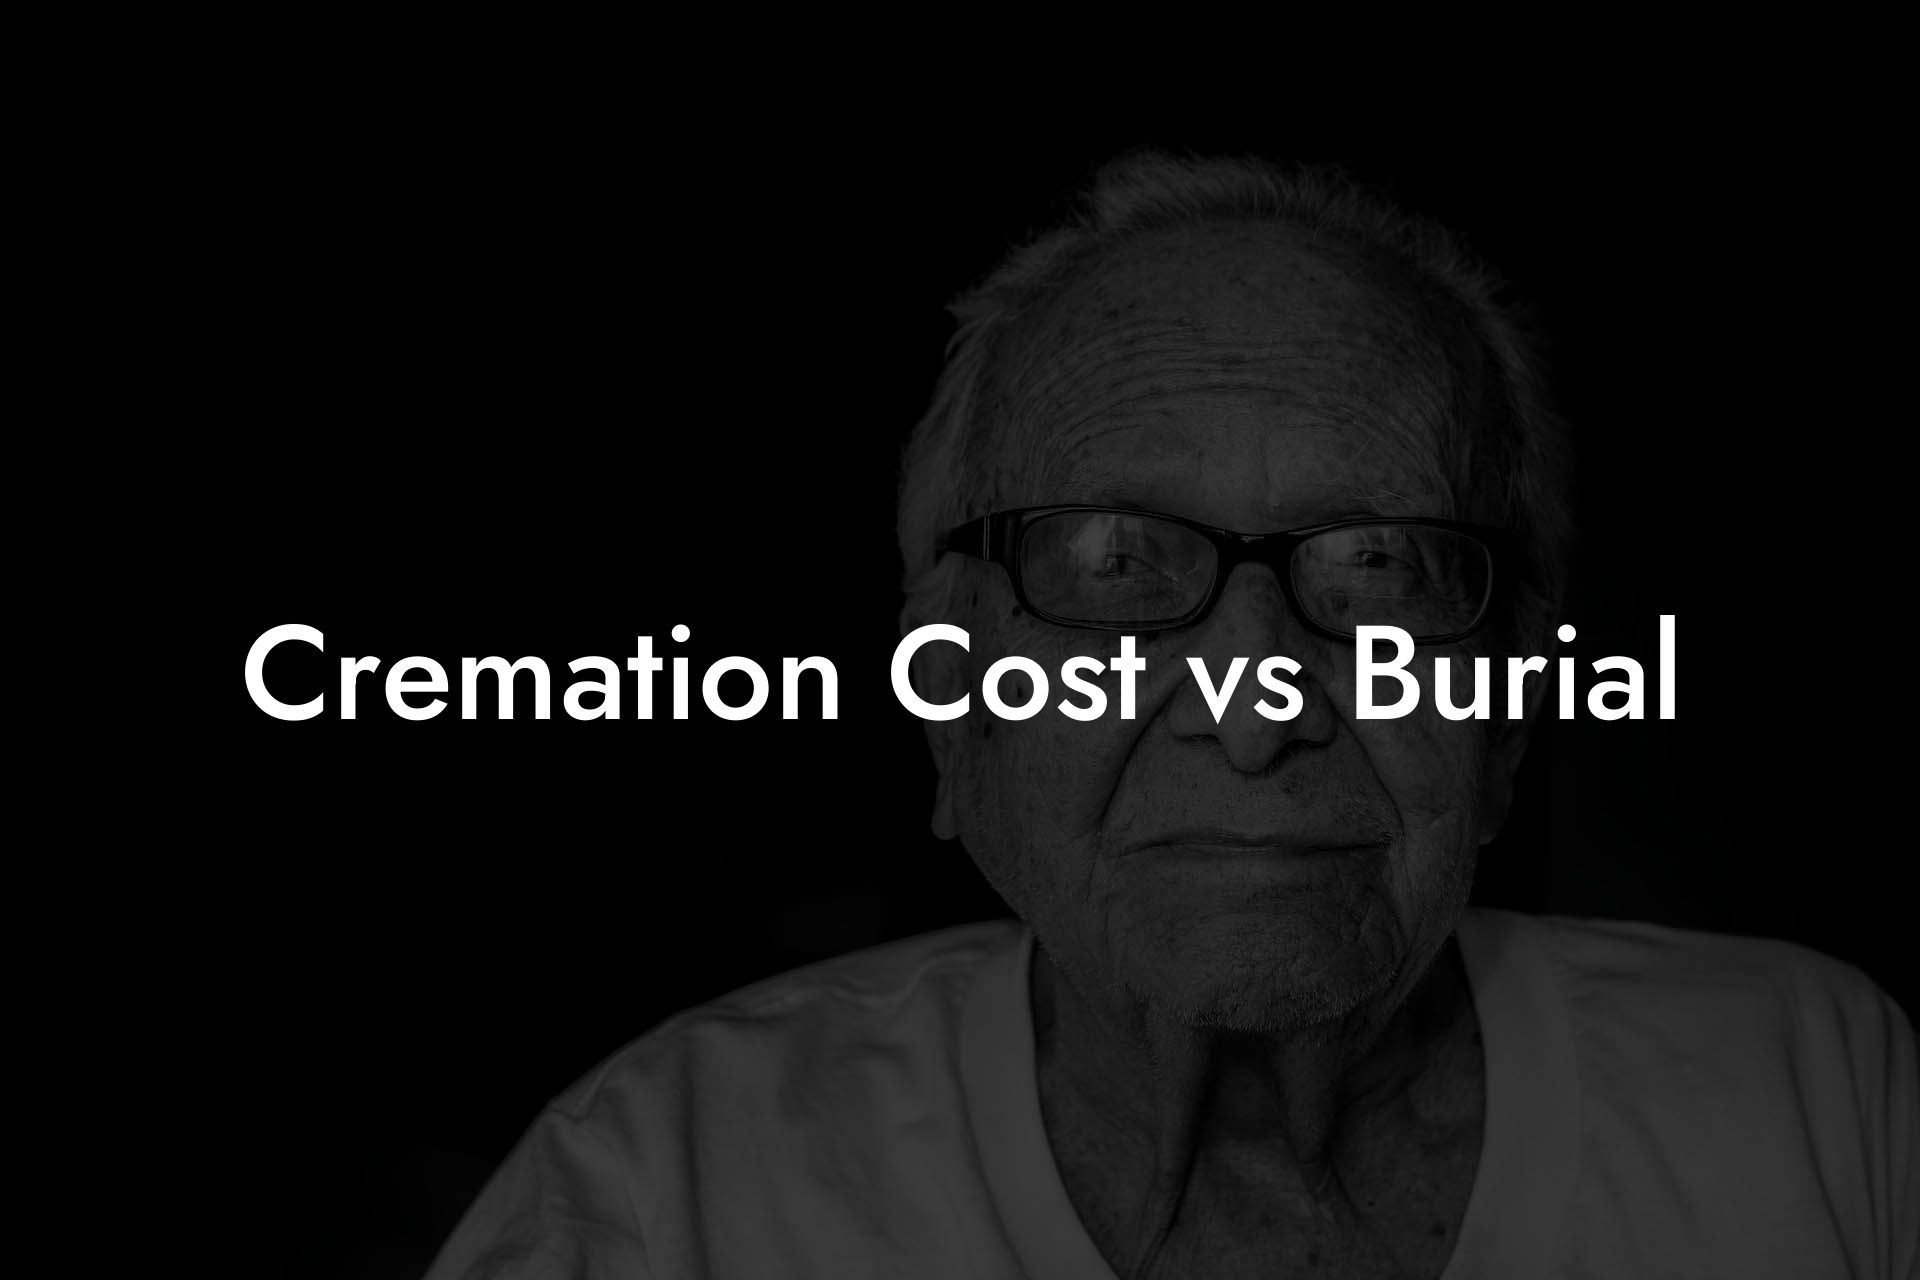 Cremation Cost vs Burial